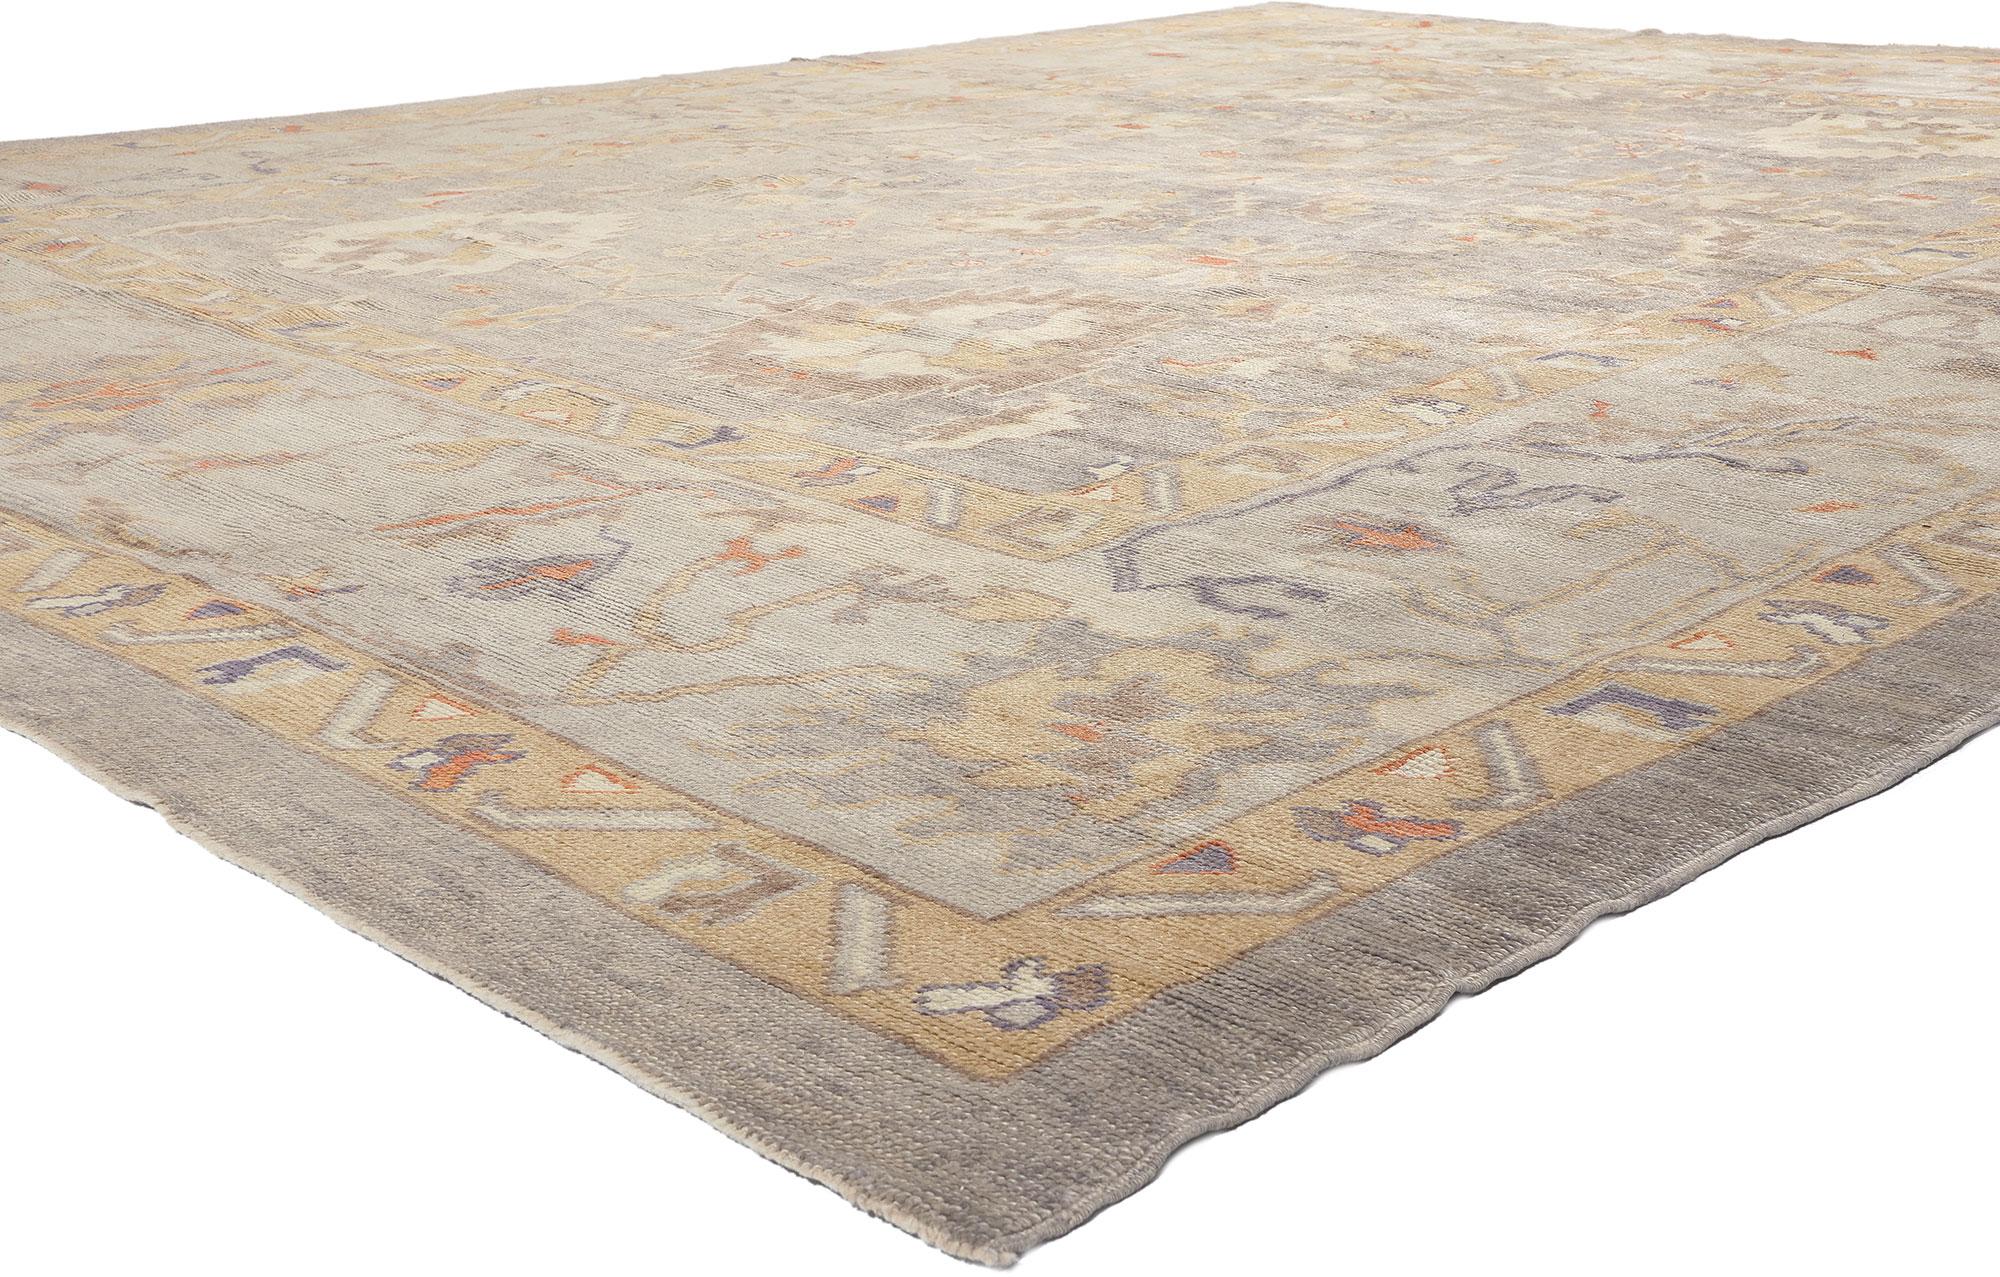 52371 Modern Oushak Turkish Rug, 11'04 x 13'10. Embark on an enchanting odyssey of contemporary elegance where each step upon this magical carpet ride is a voyage into a world awash with neutral earth-tone colors—an ode to timeless sophistication.